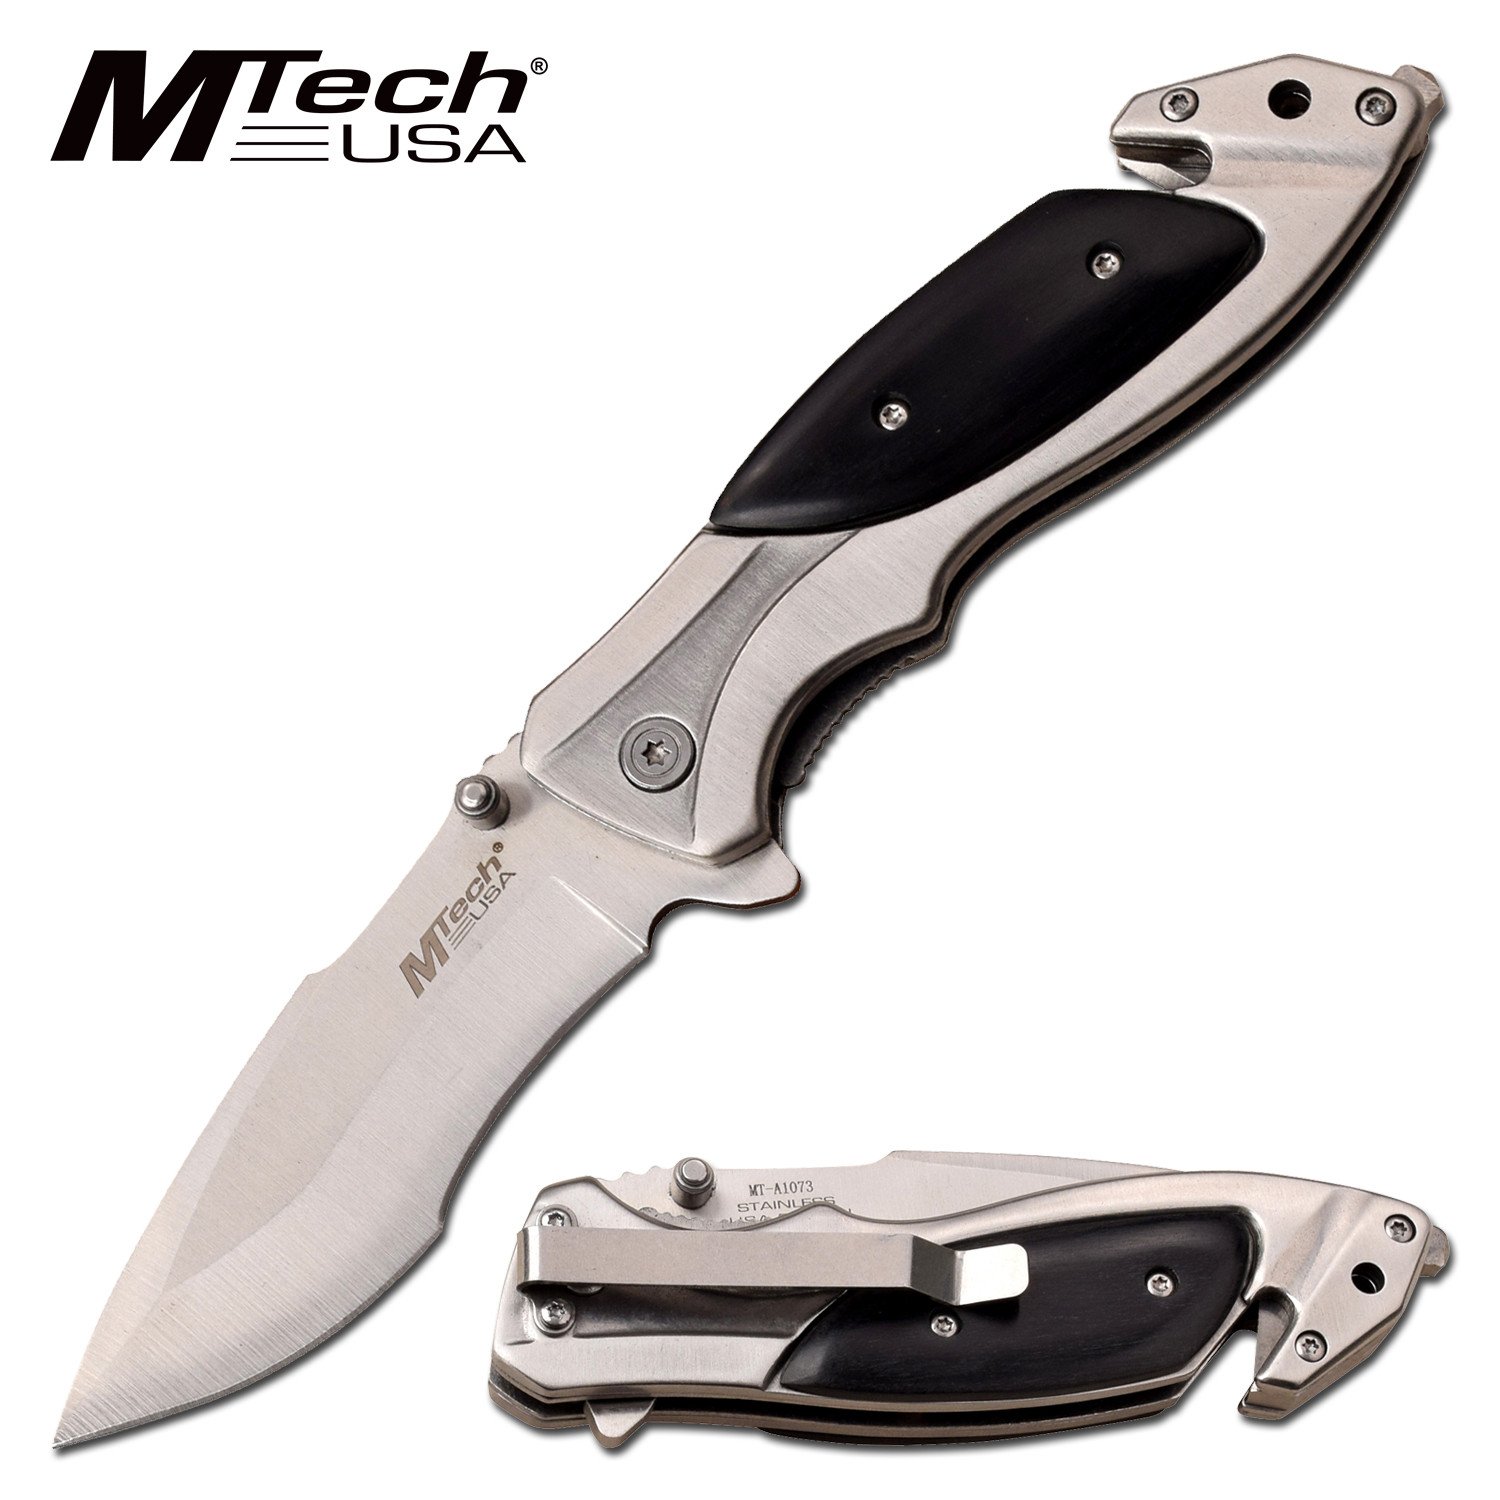 Spring-Assist Folding Knife 3.25in. Silver Blade Black Wood Tactical Rescue EDC